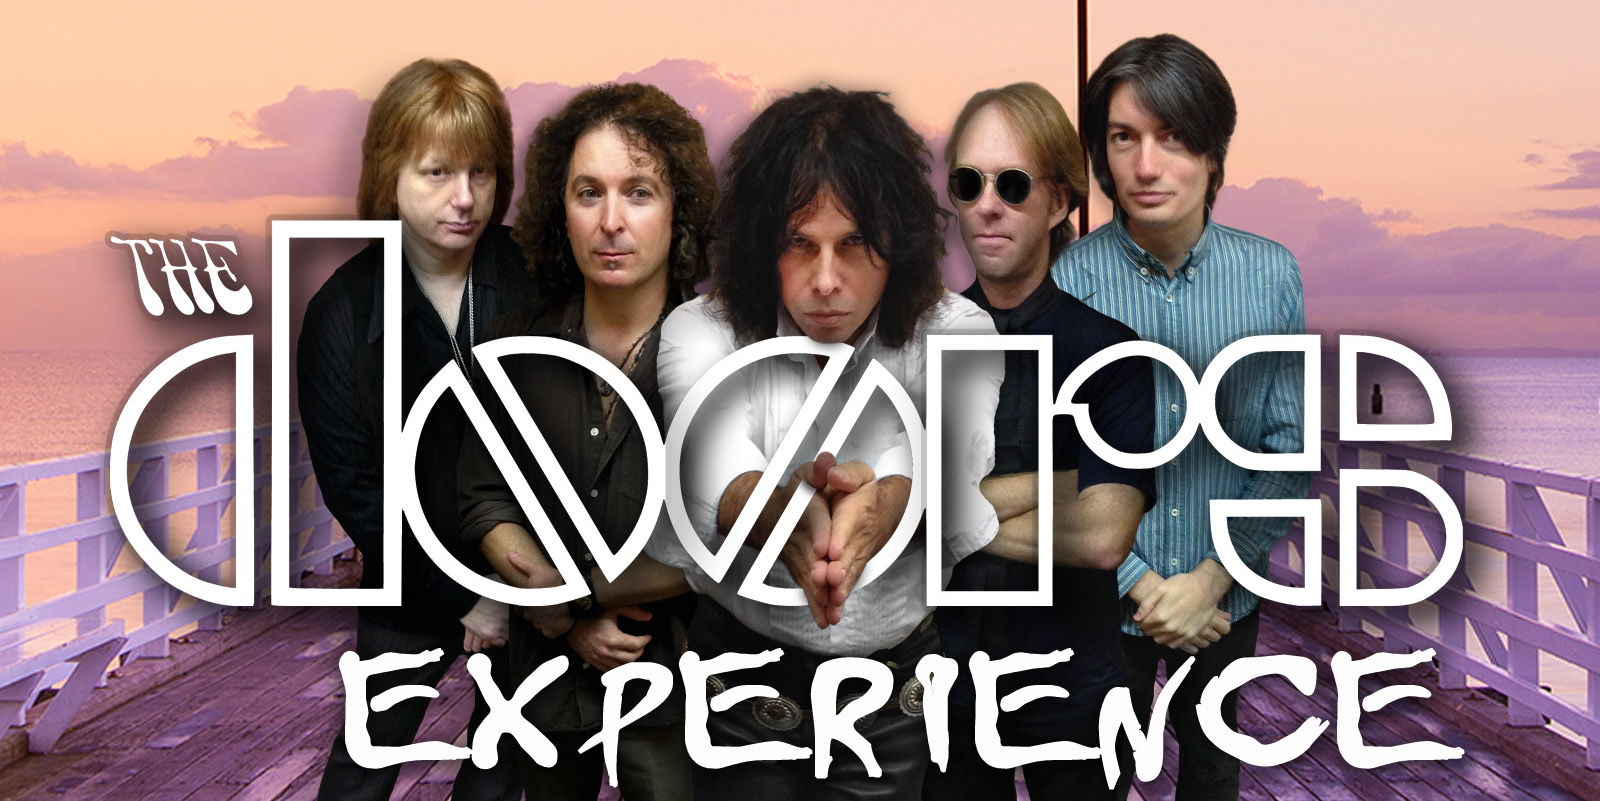 The Doors Experience promotional image